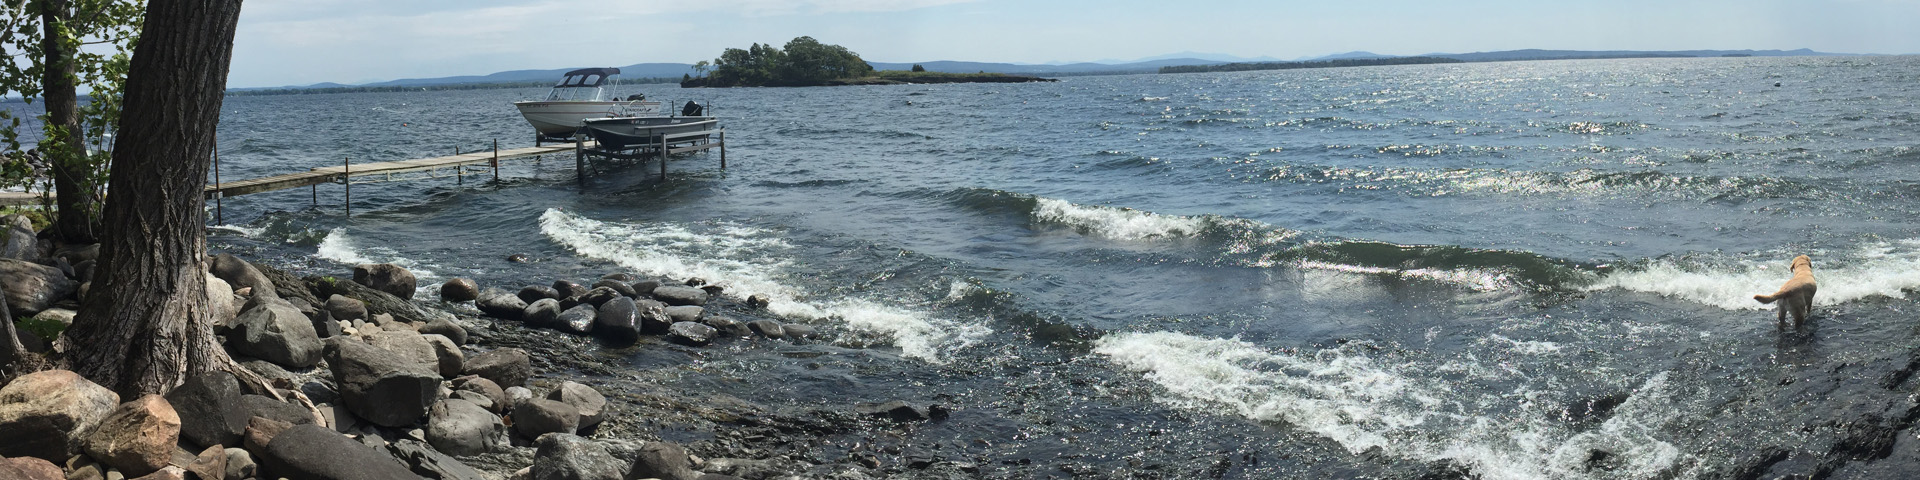 The waves roll in on Lake Champlain. A yellow Labrador Retriever stands in the waves; an island appears in the distance.